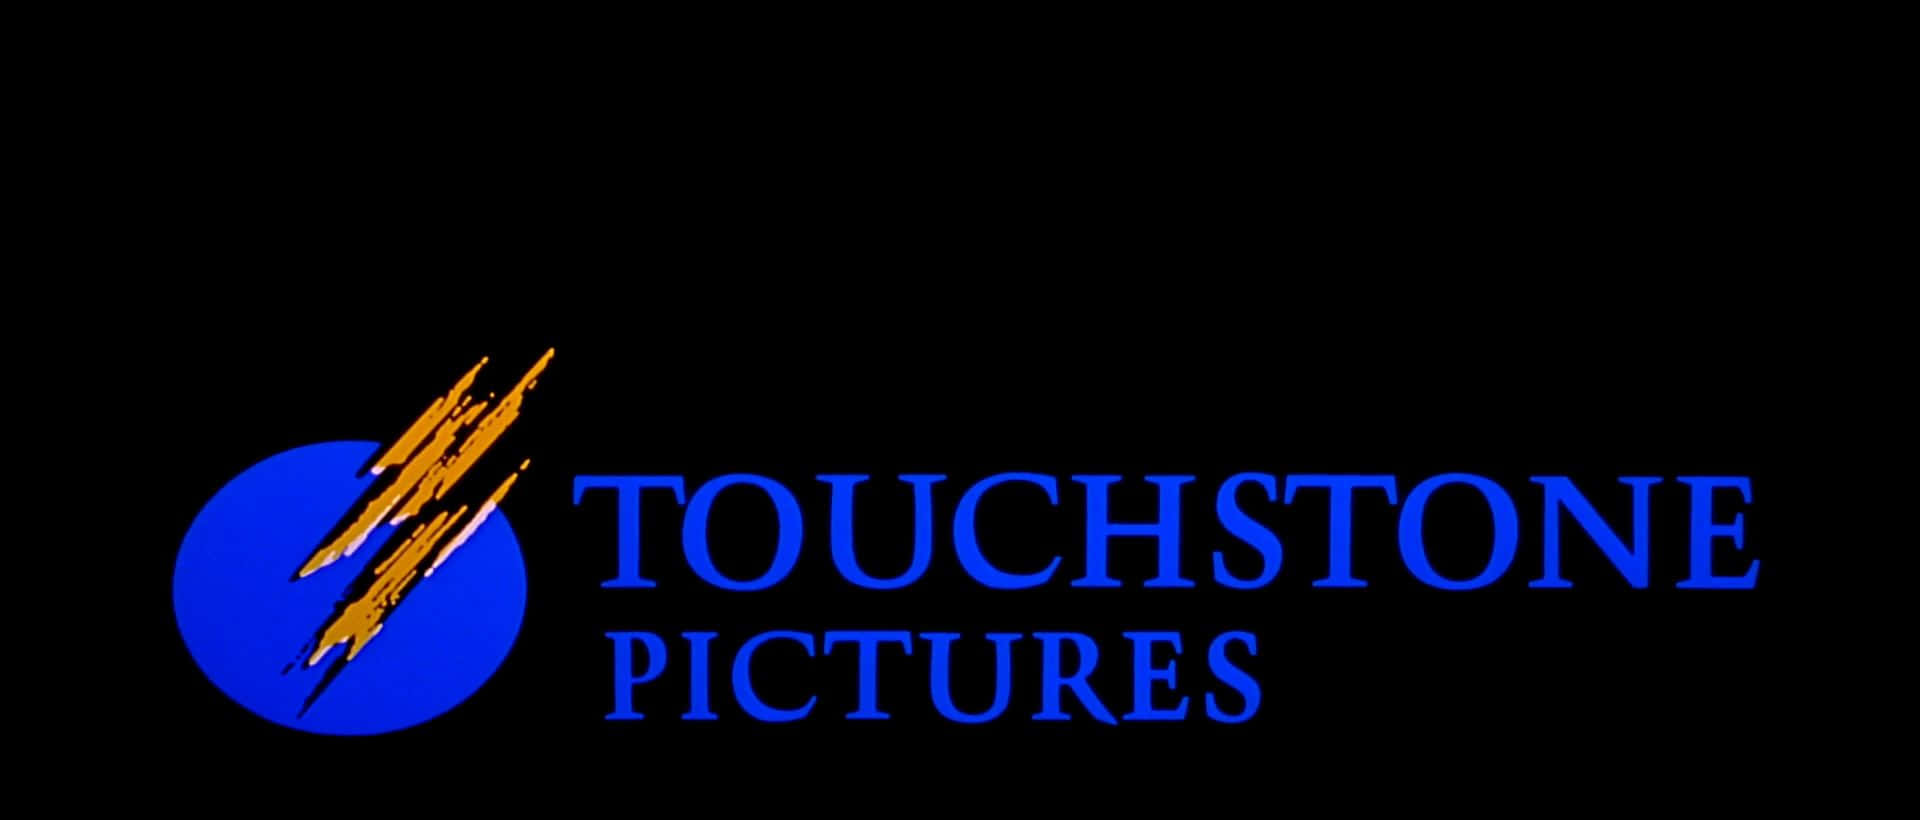 Ultrawide Touchstone Pictures 1920 x 820 Picture